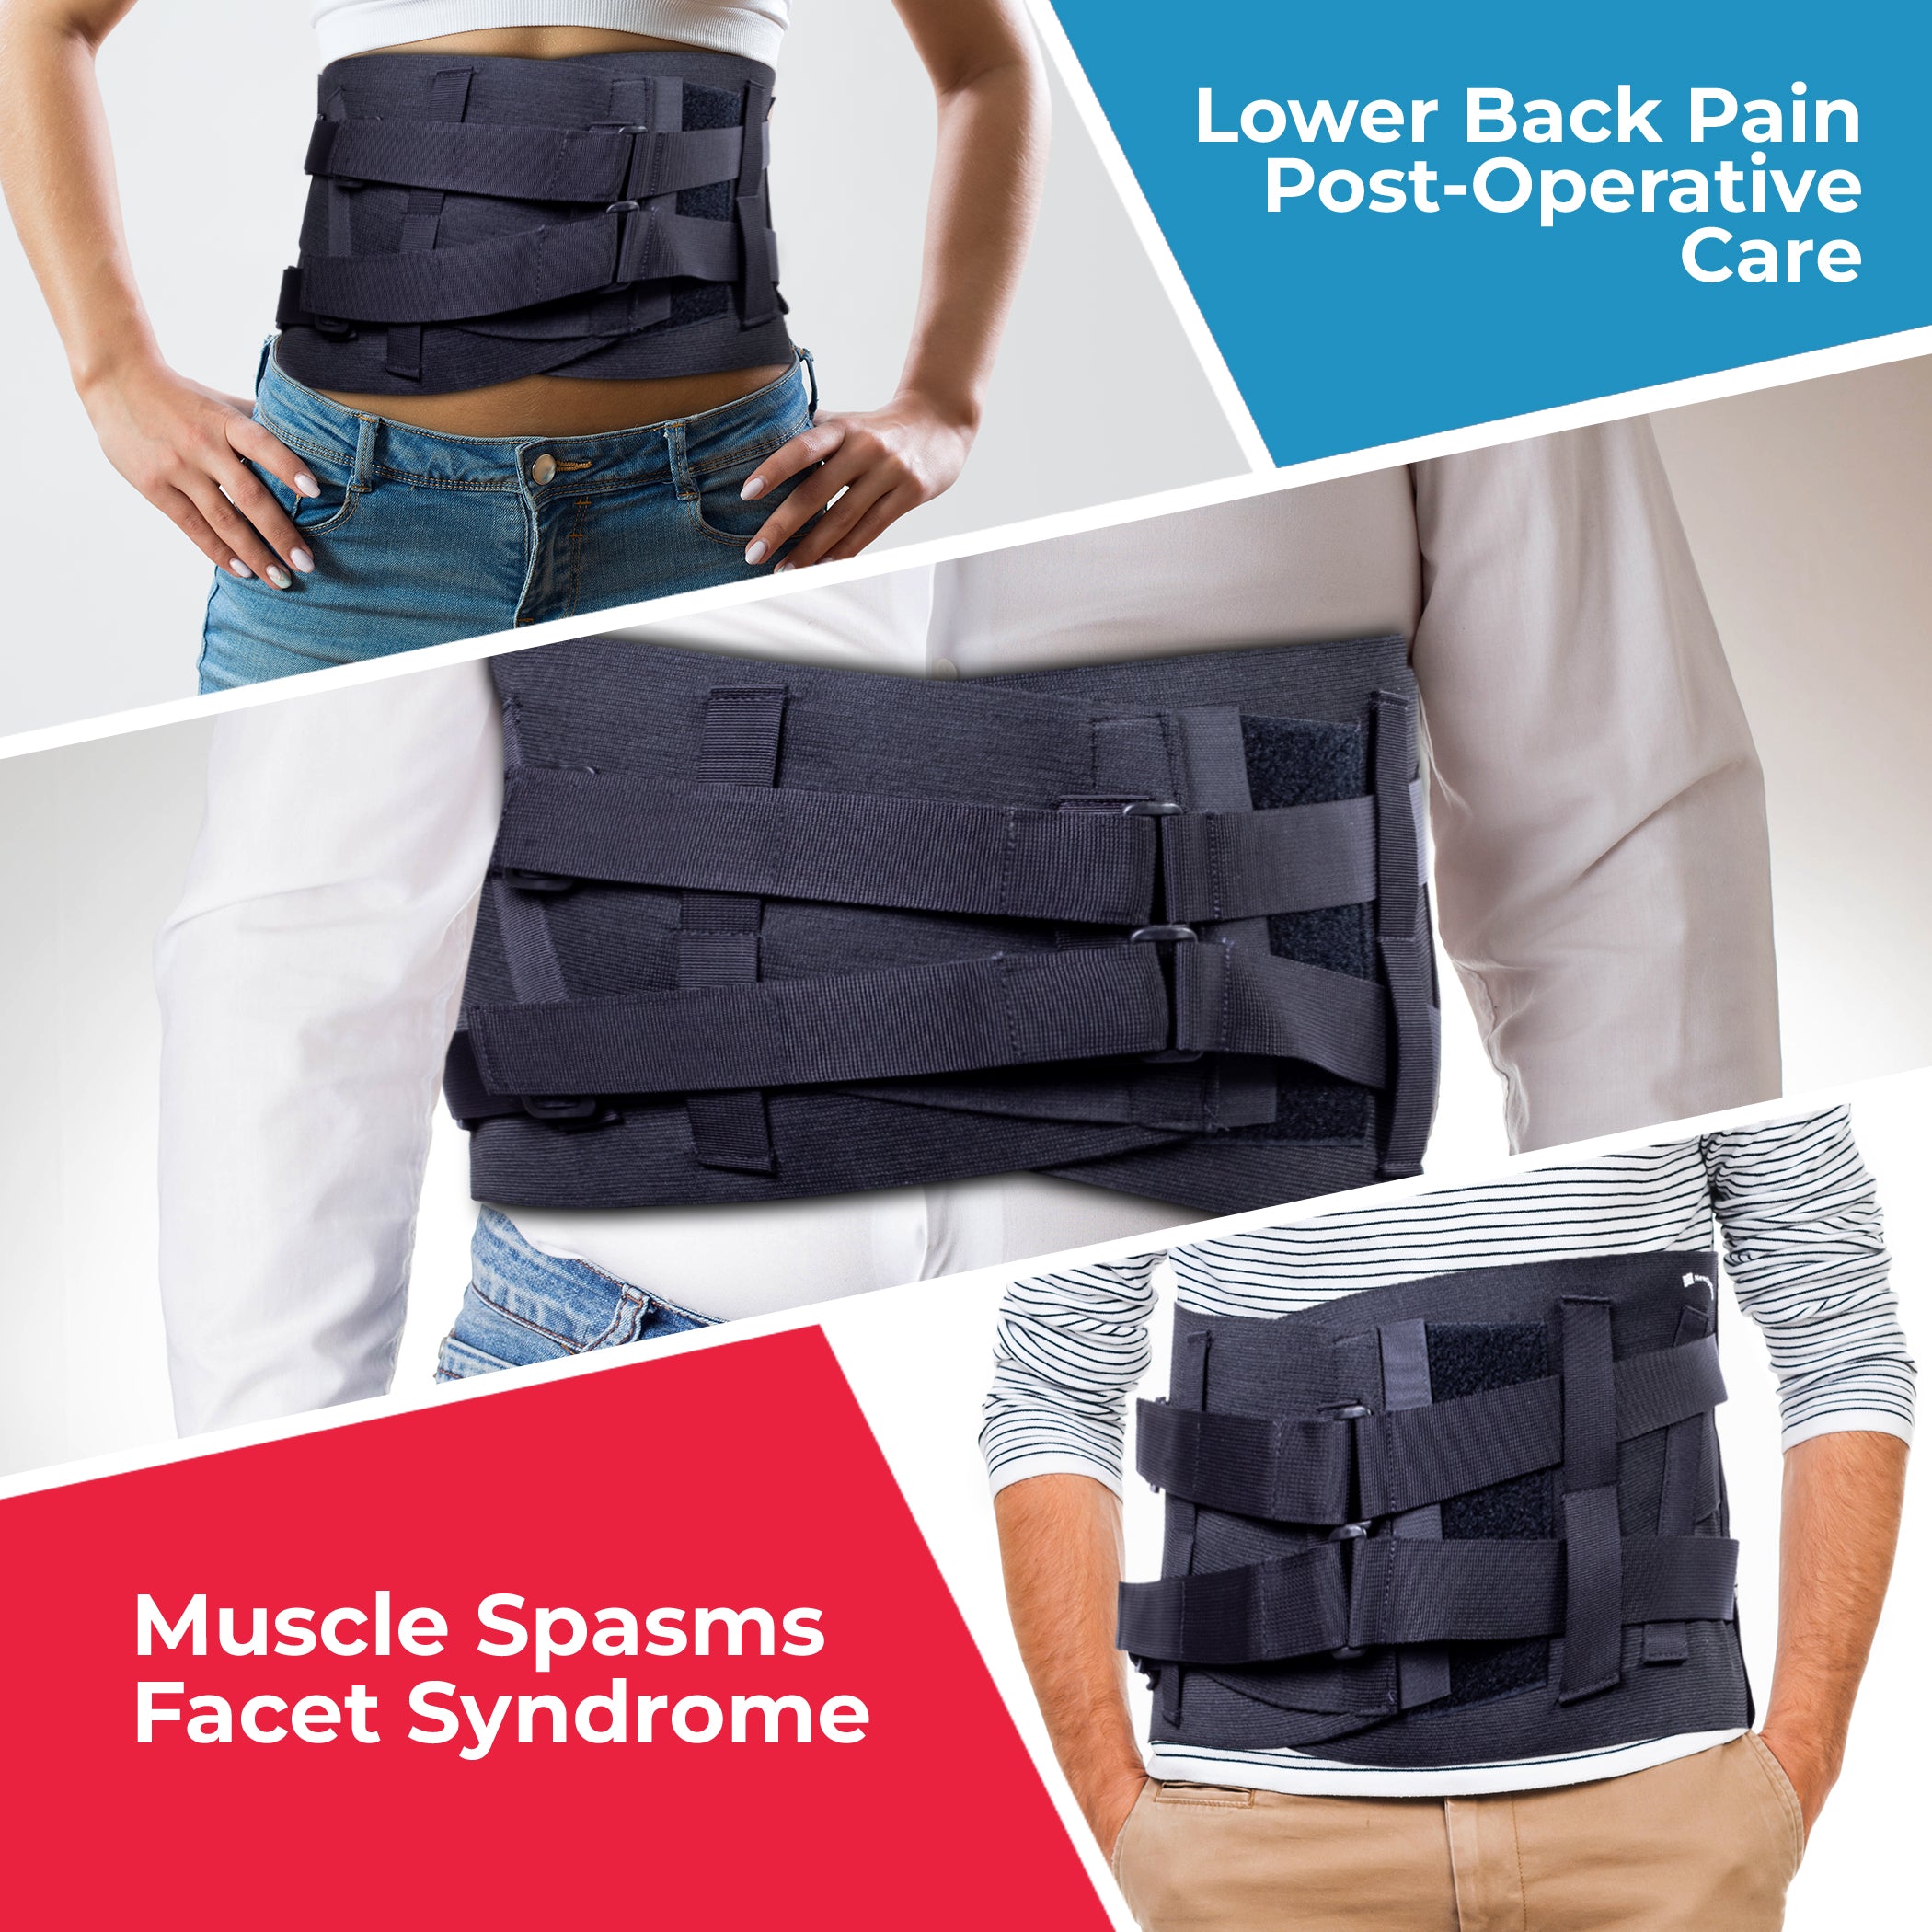 SOLES Lumbar Back Brace Lumbosacral Back Support - Adjustable, Breathable  Corset - Unisex- Reduces Back Pain, Supports Core Strength - Comfortable